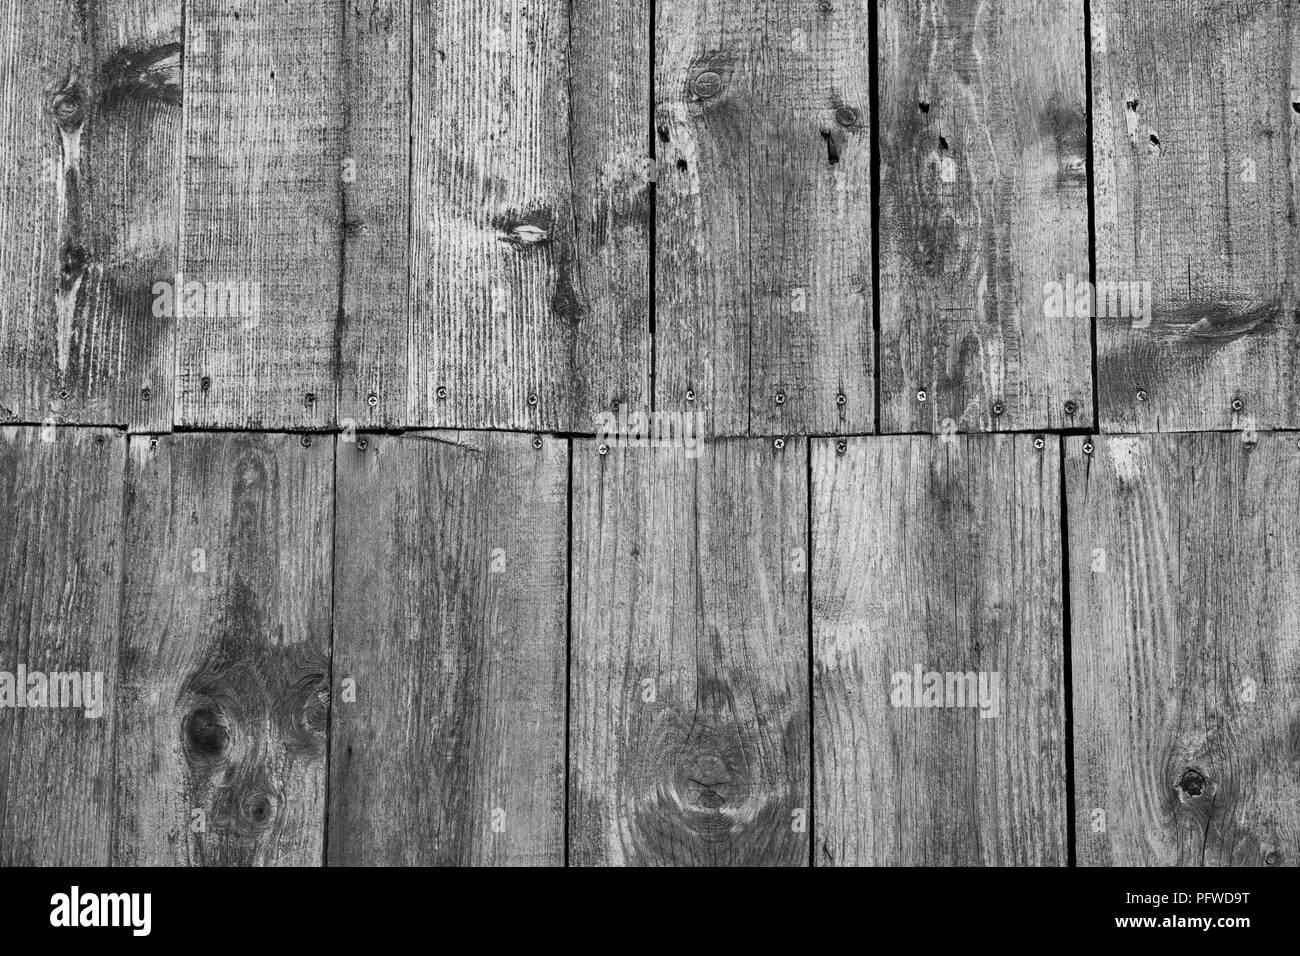 Wooden Board Plank Texture Background Wallpaper Stock Photo